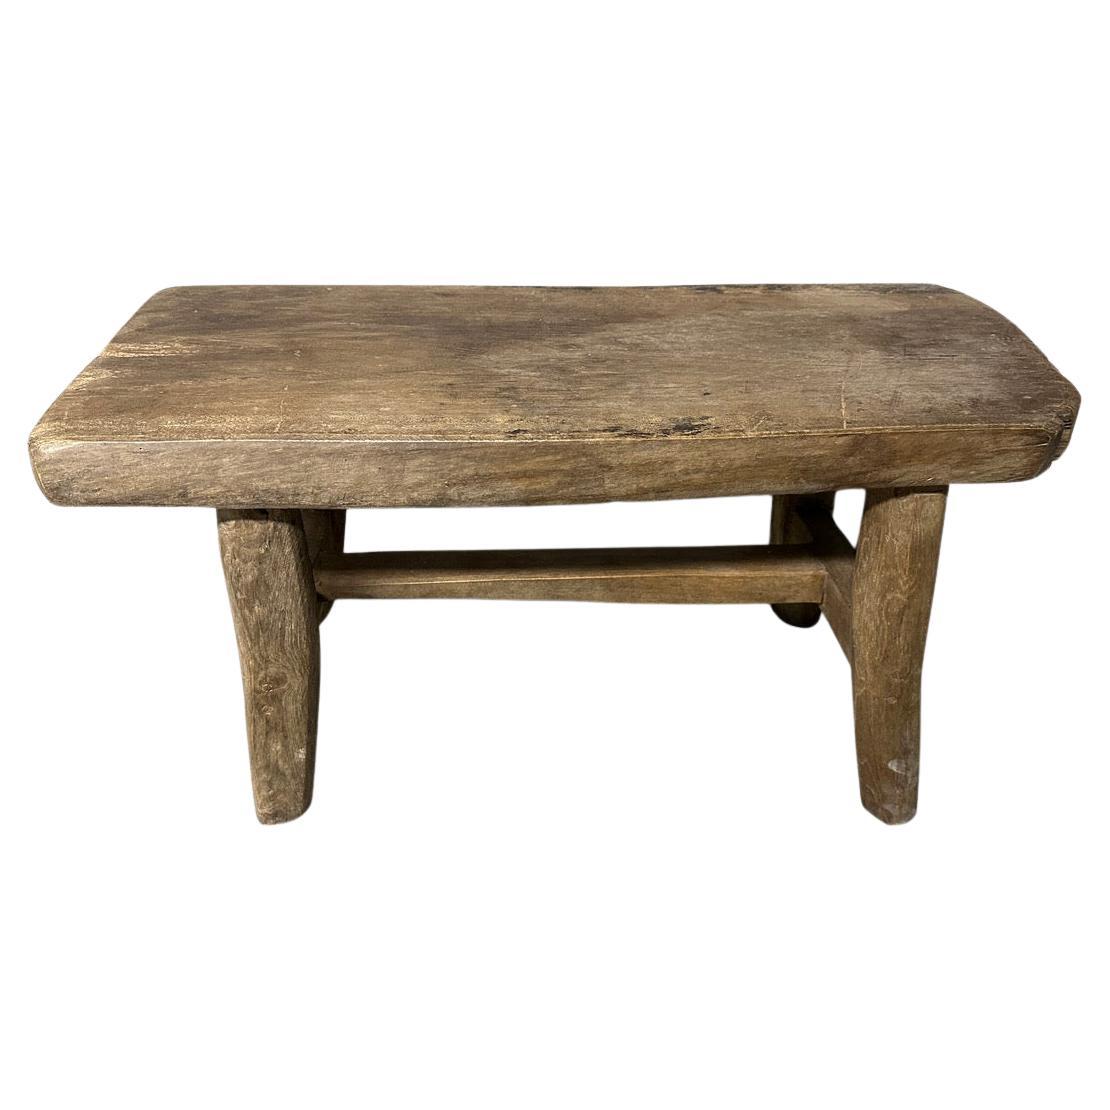 Andrianna Shamaris Antique Side Table or Bench For Sale